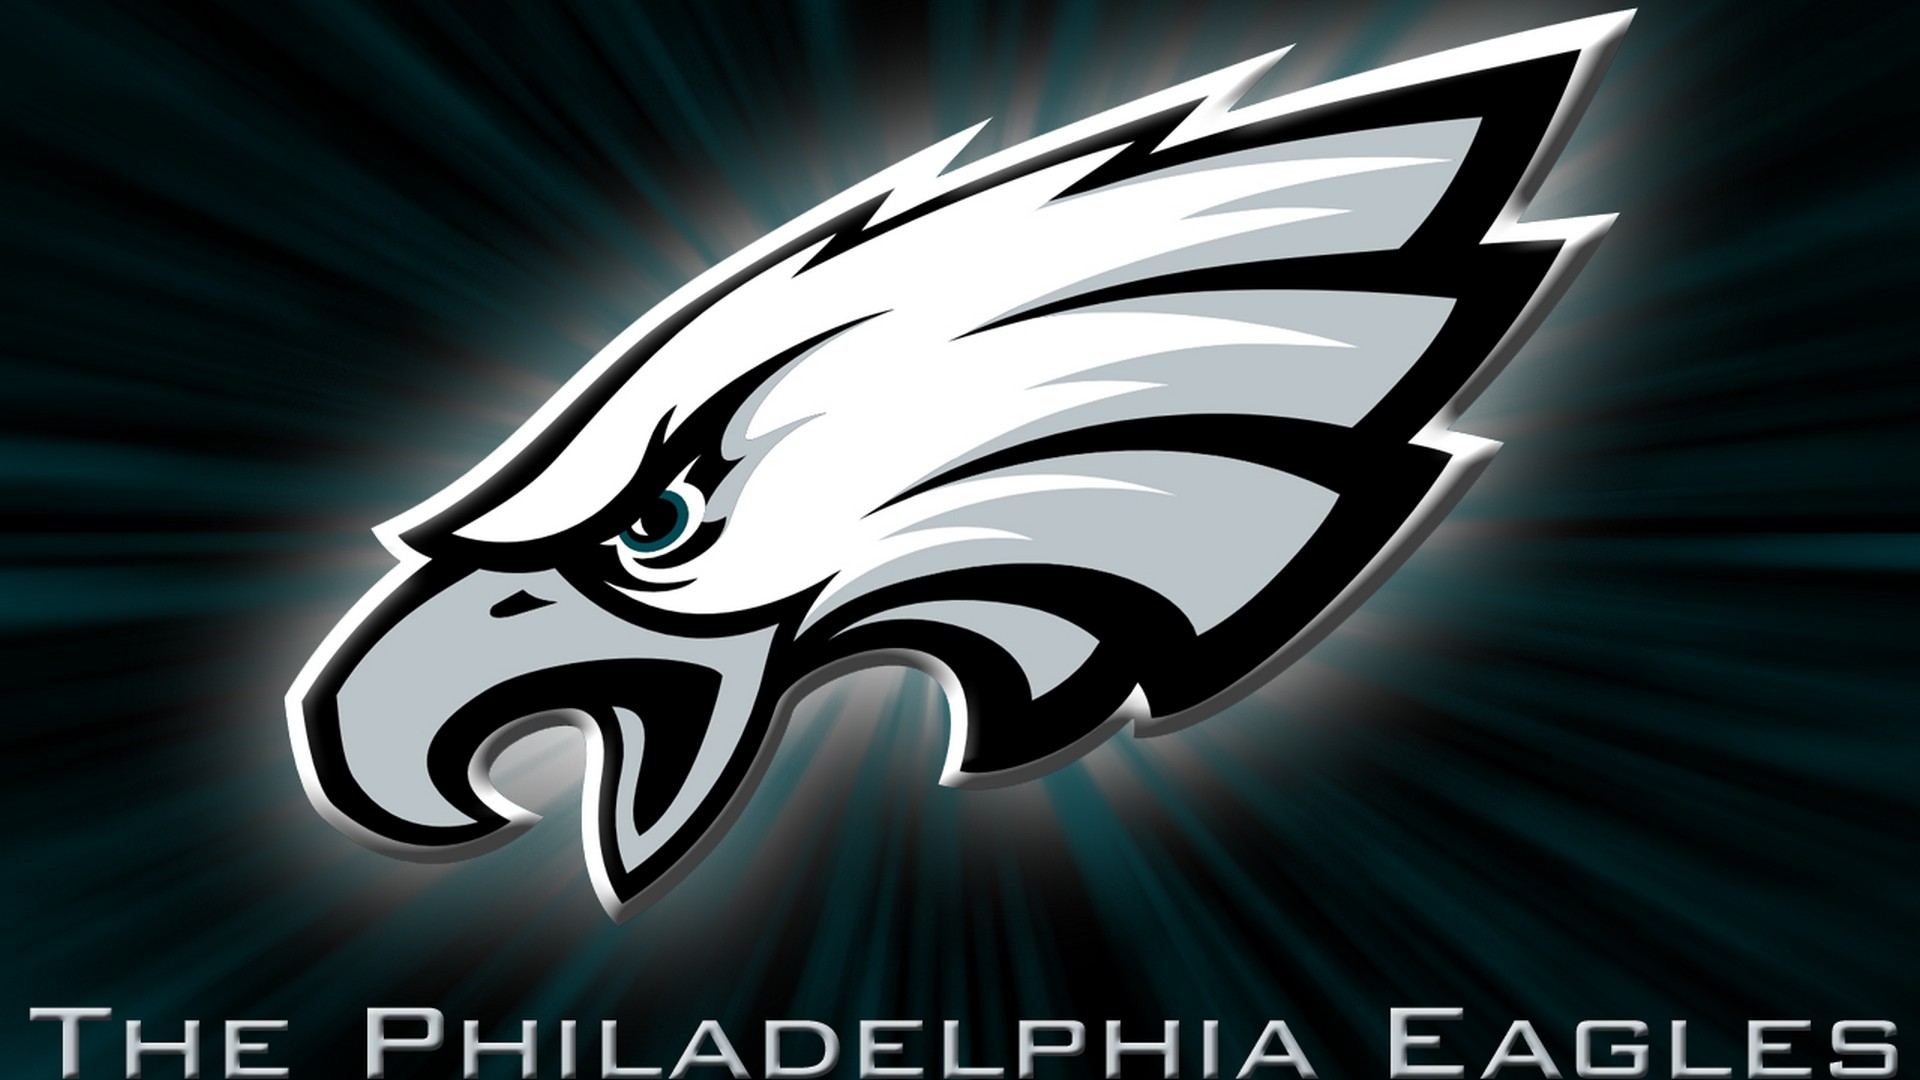 NFL Eagles Mac Backgrounds with resolution 1920x1080 pixel. You can make this wallpaper for your Mac or Windows Desktop Background, iPhone, Android or Tablet and another Smartphone device